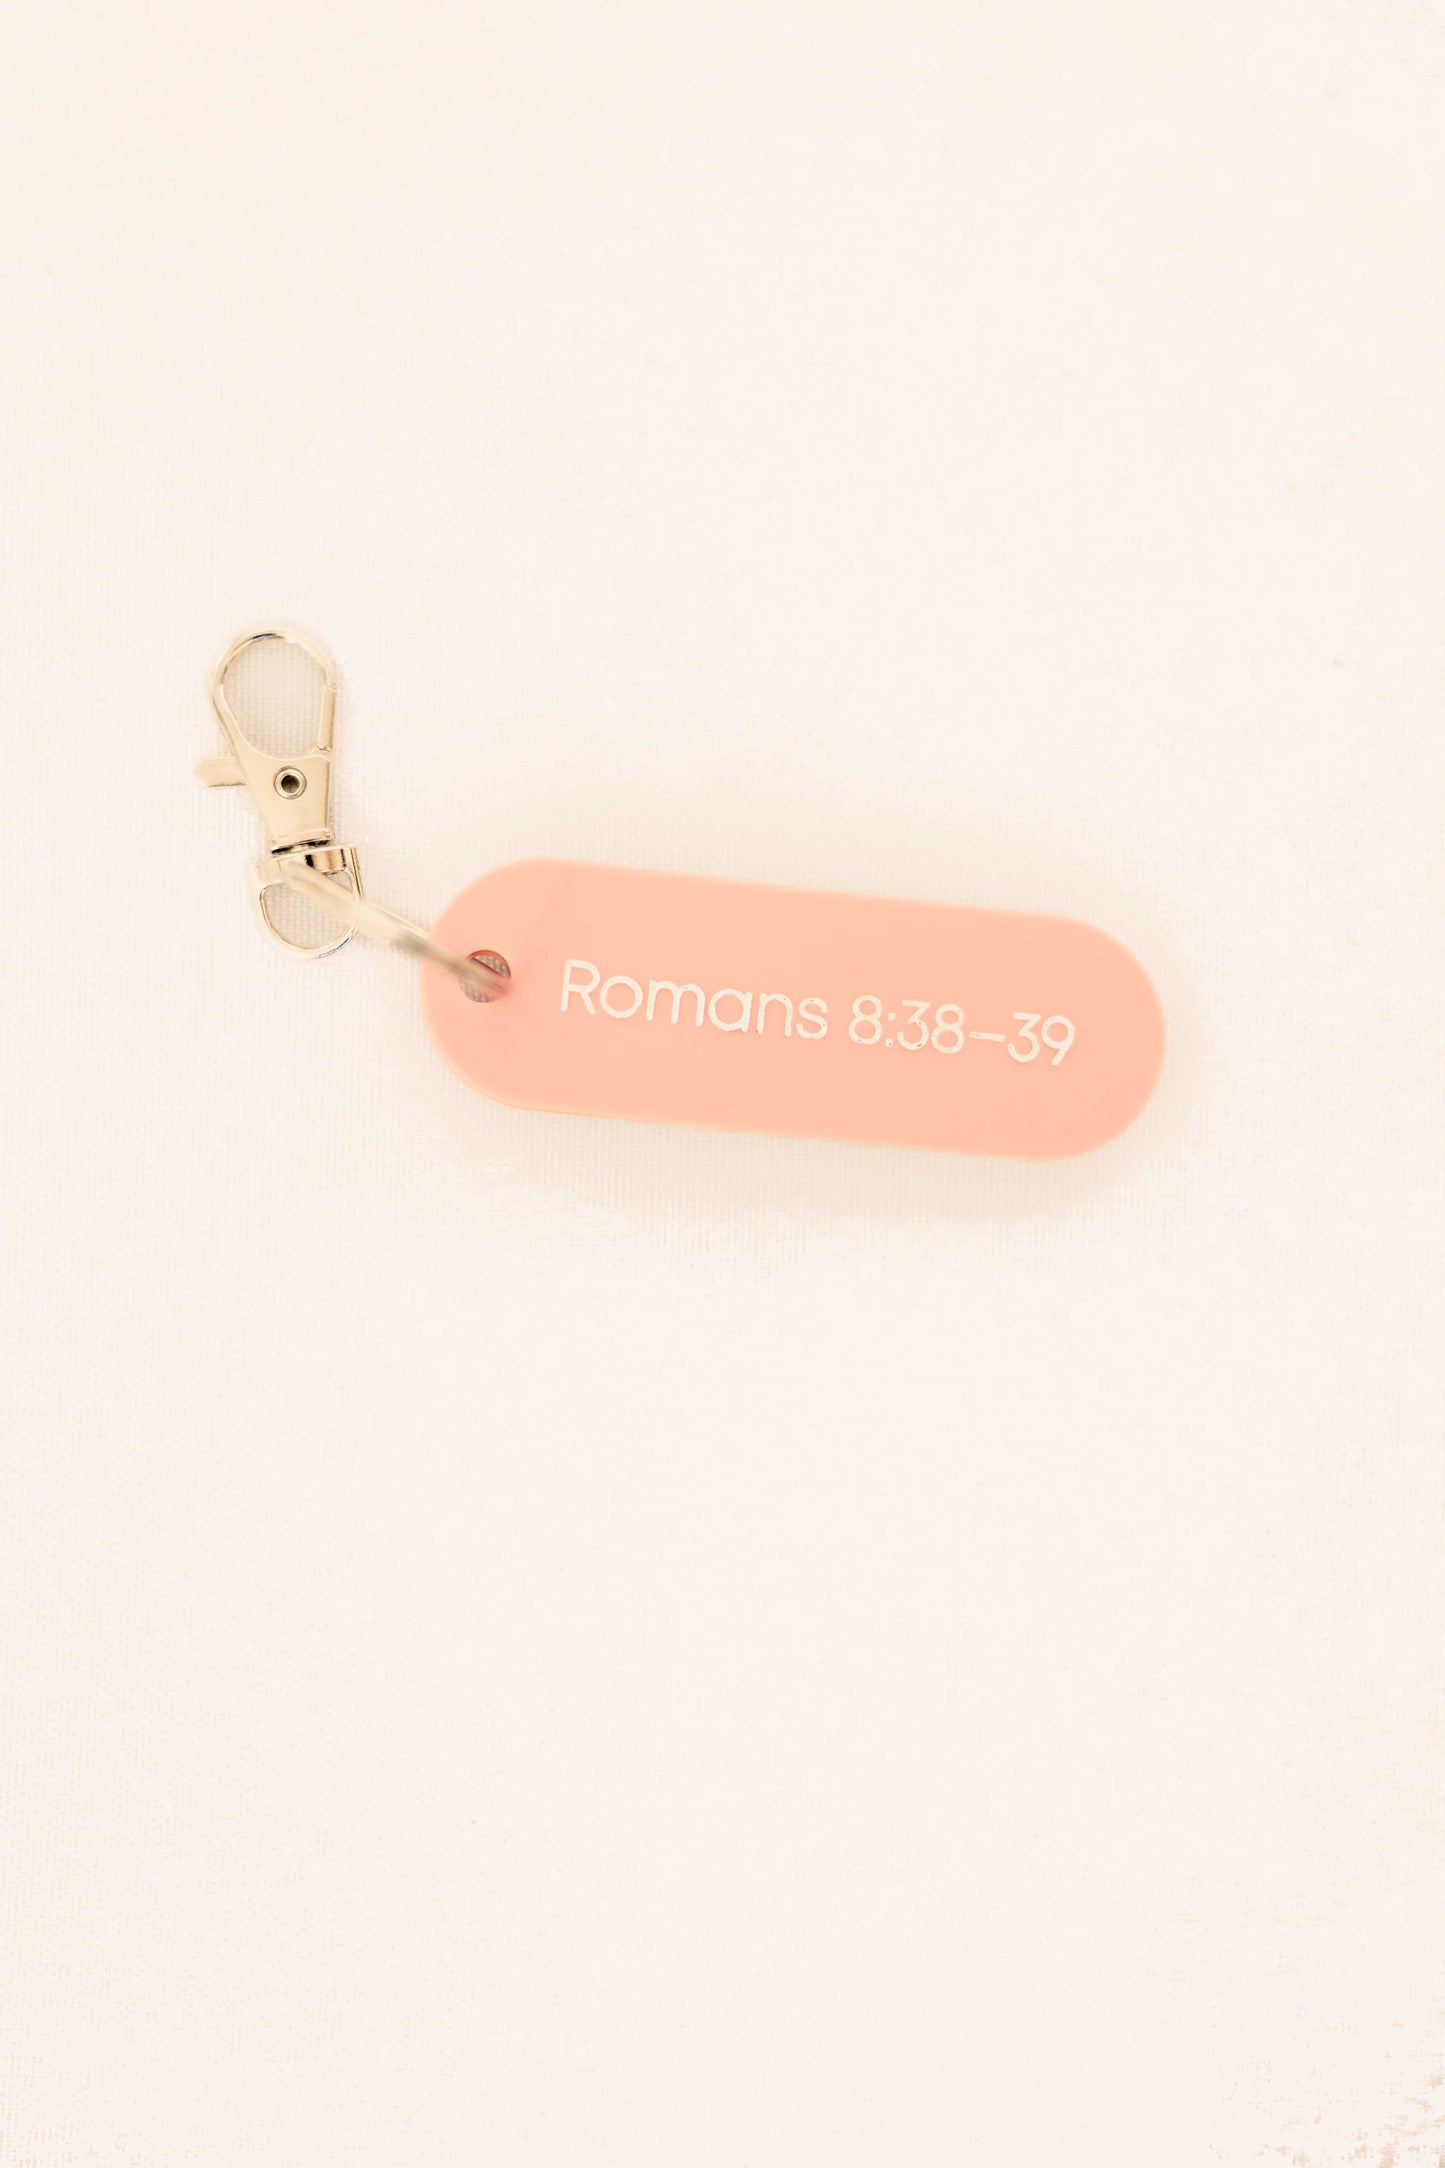 Words of Intention Keychains